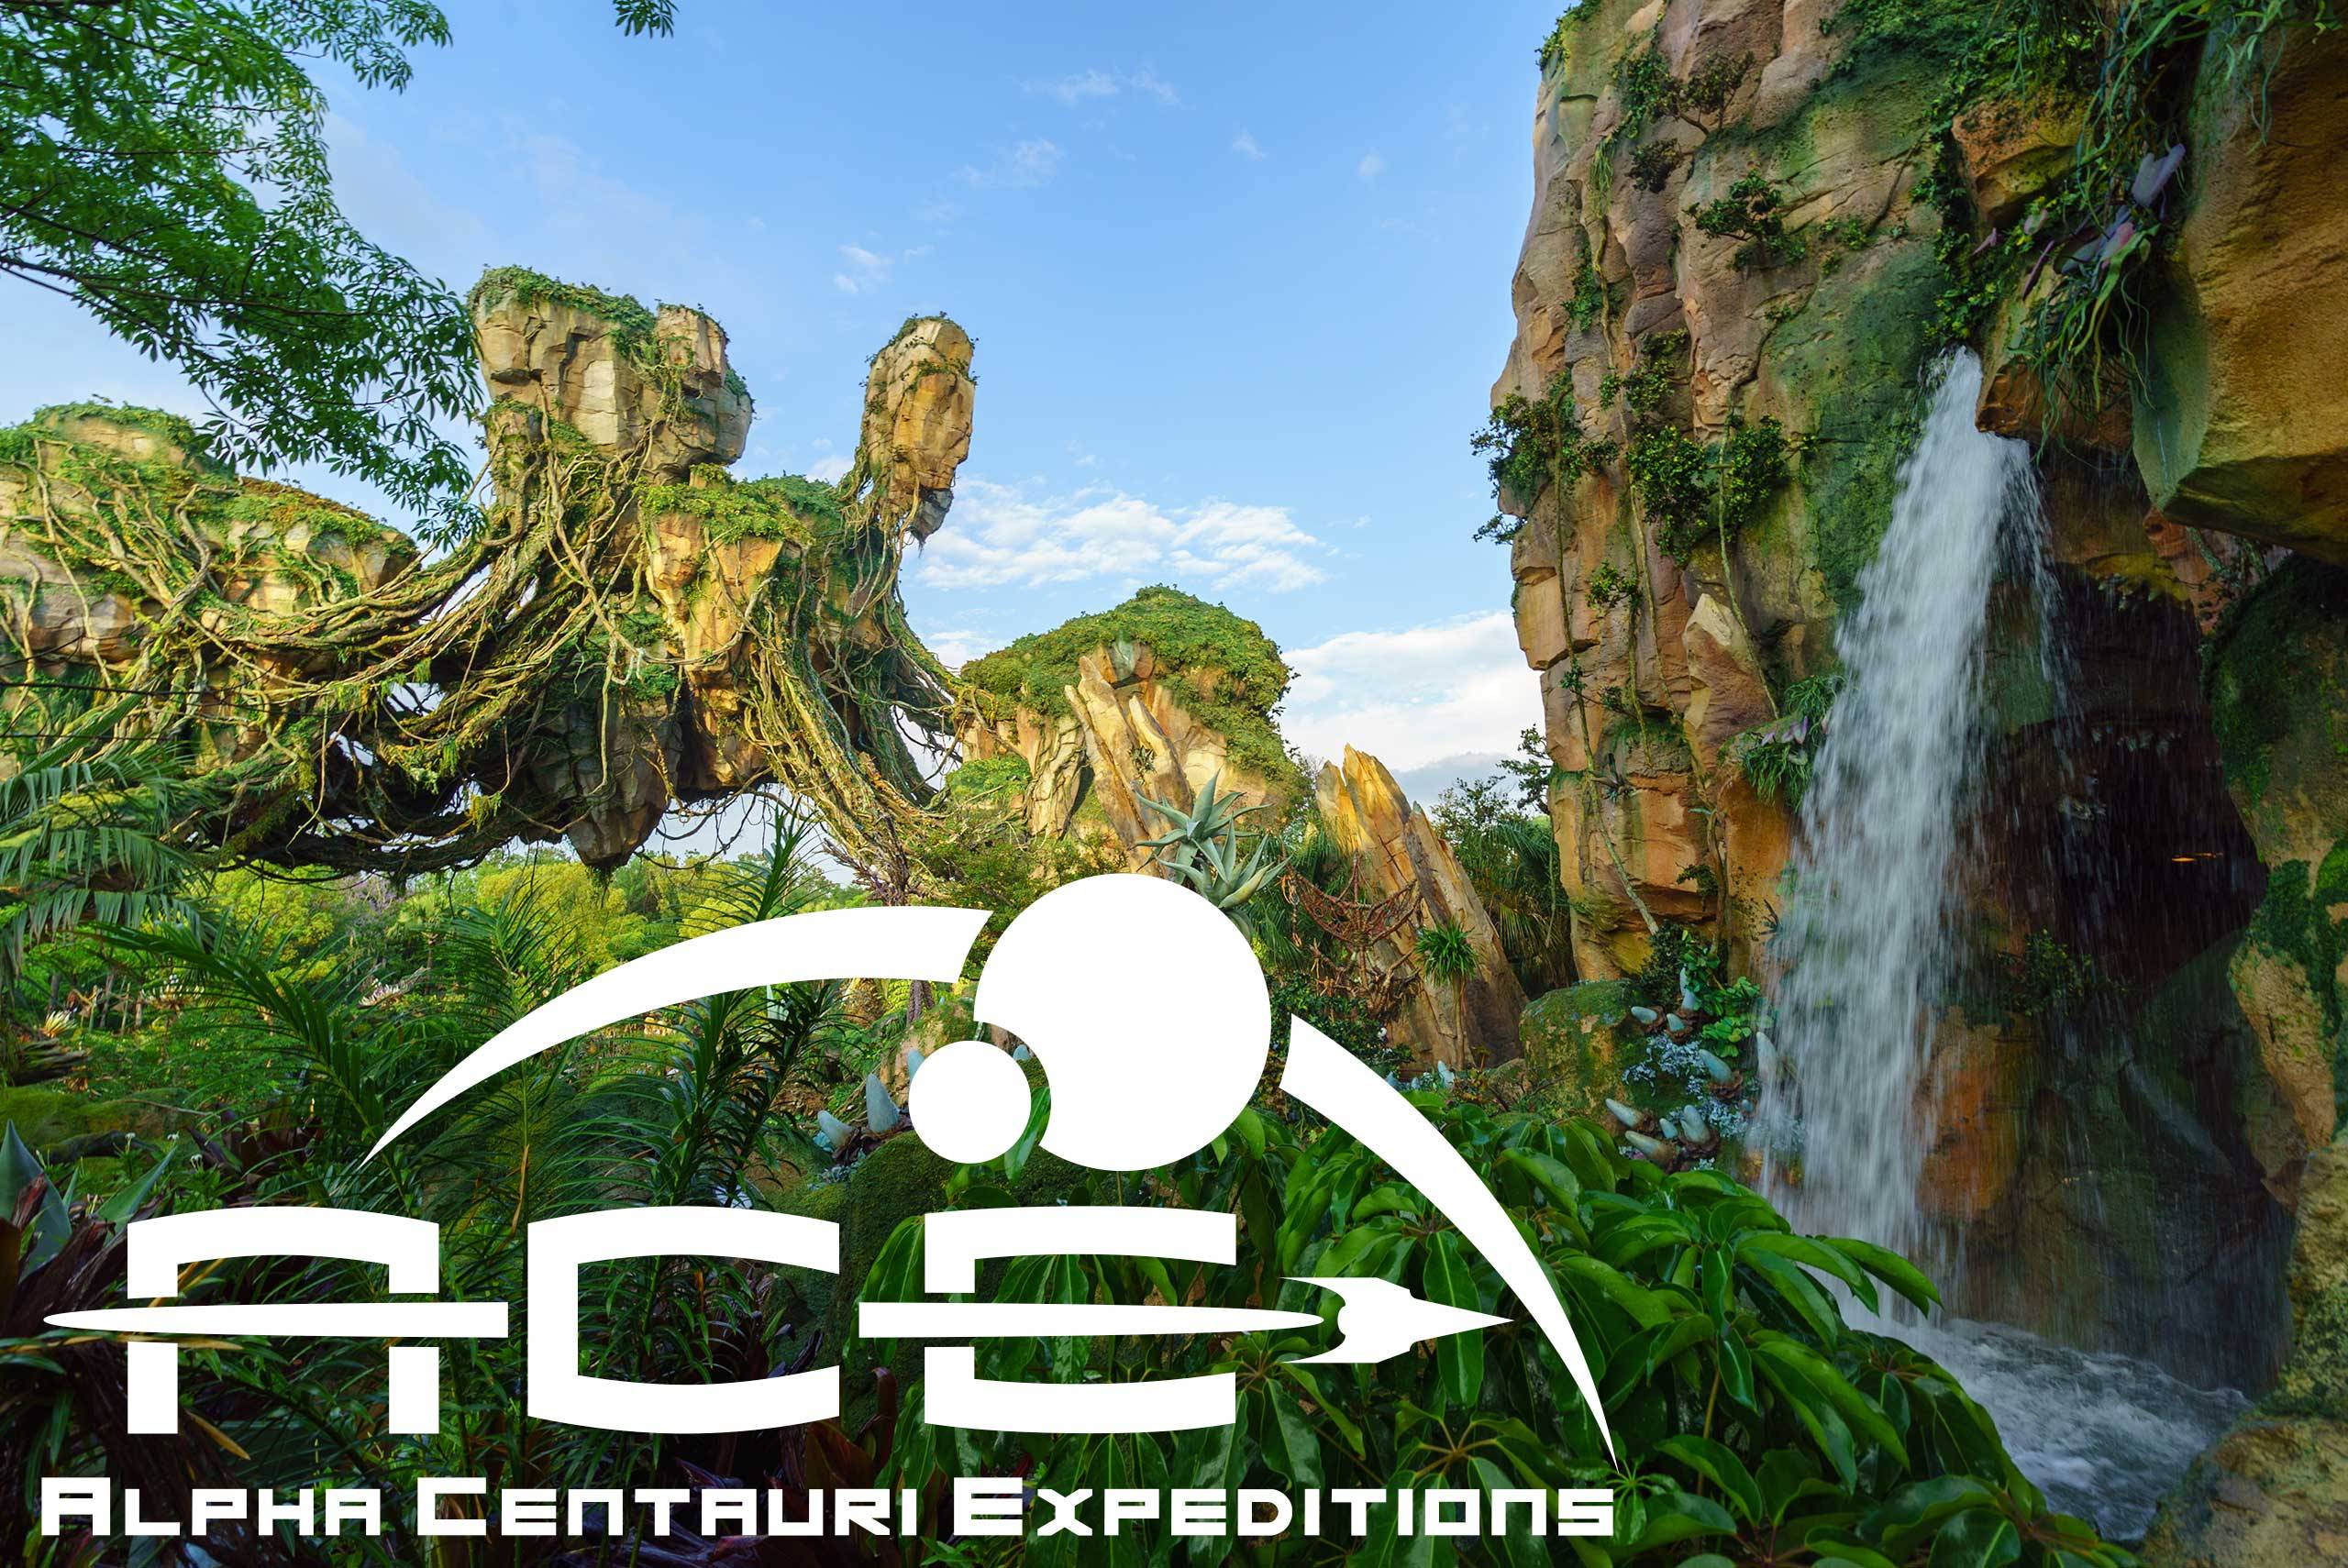 All you need to know about ACE and PCI in Pandora - The World of Avatar